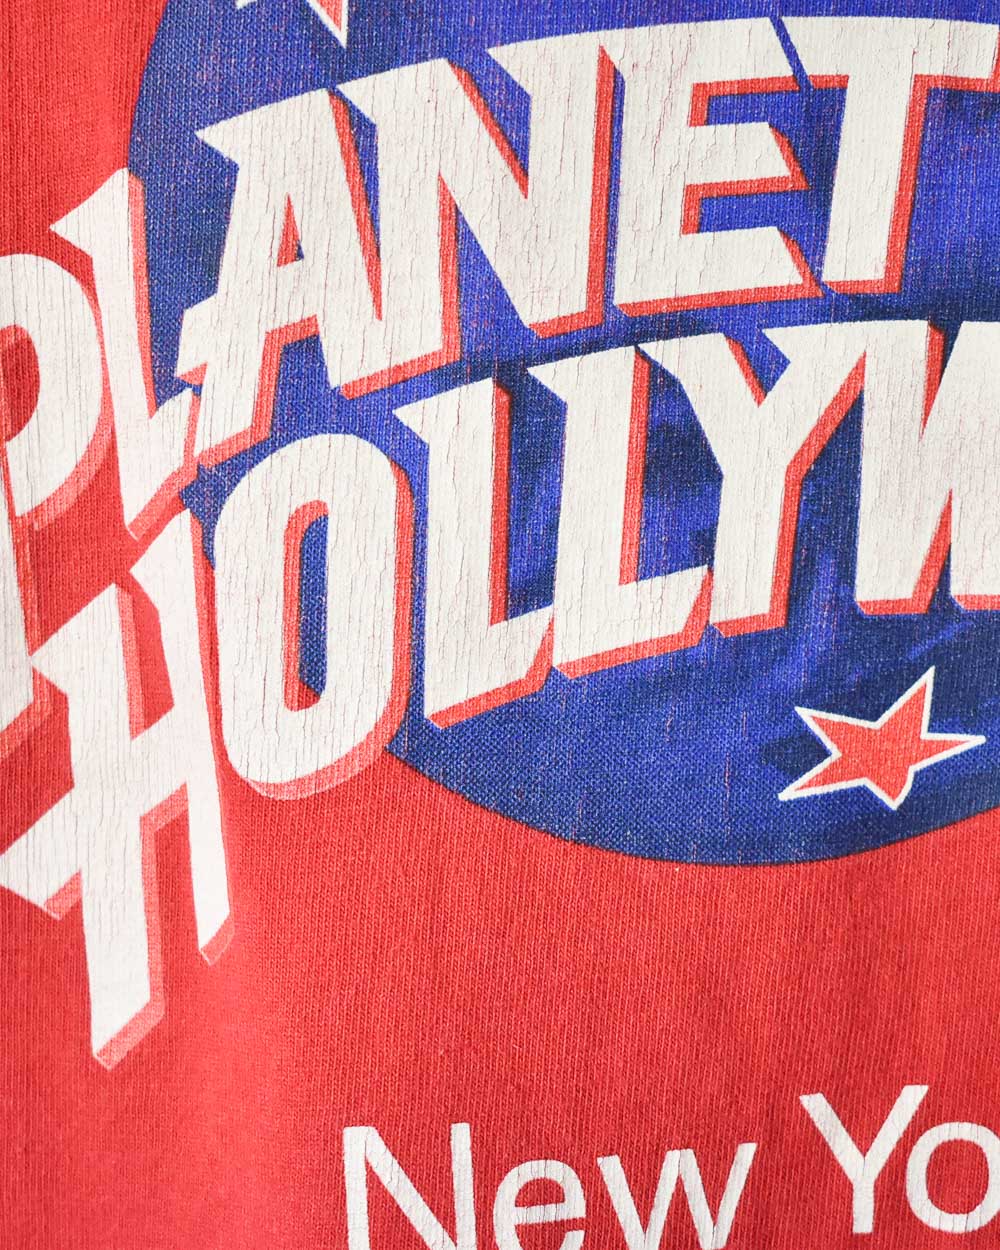 Red Planet Hollywood New York T-Shirt - Large